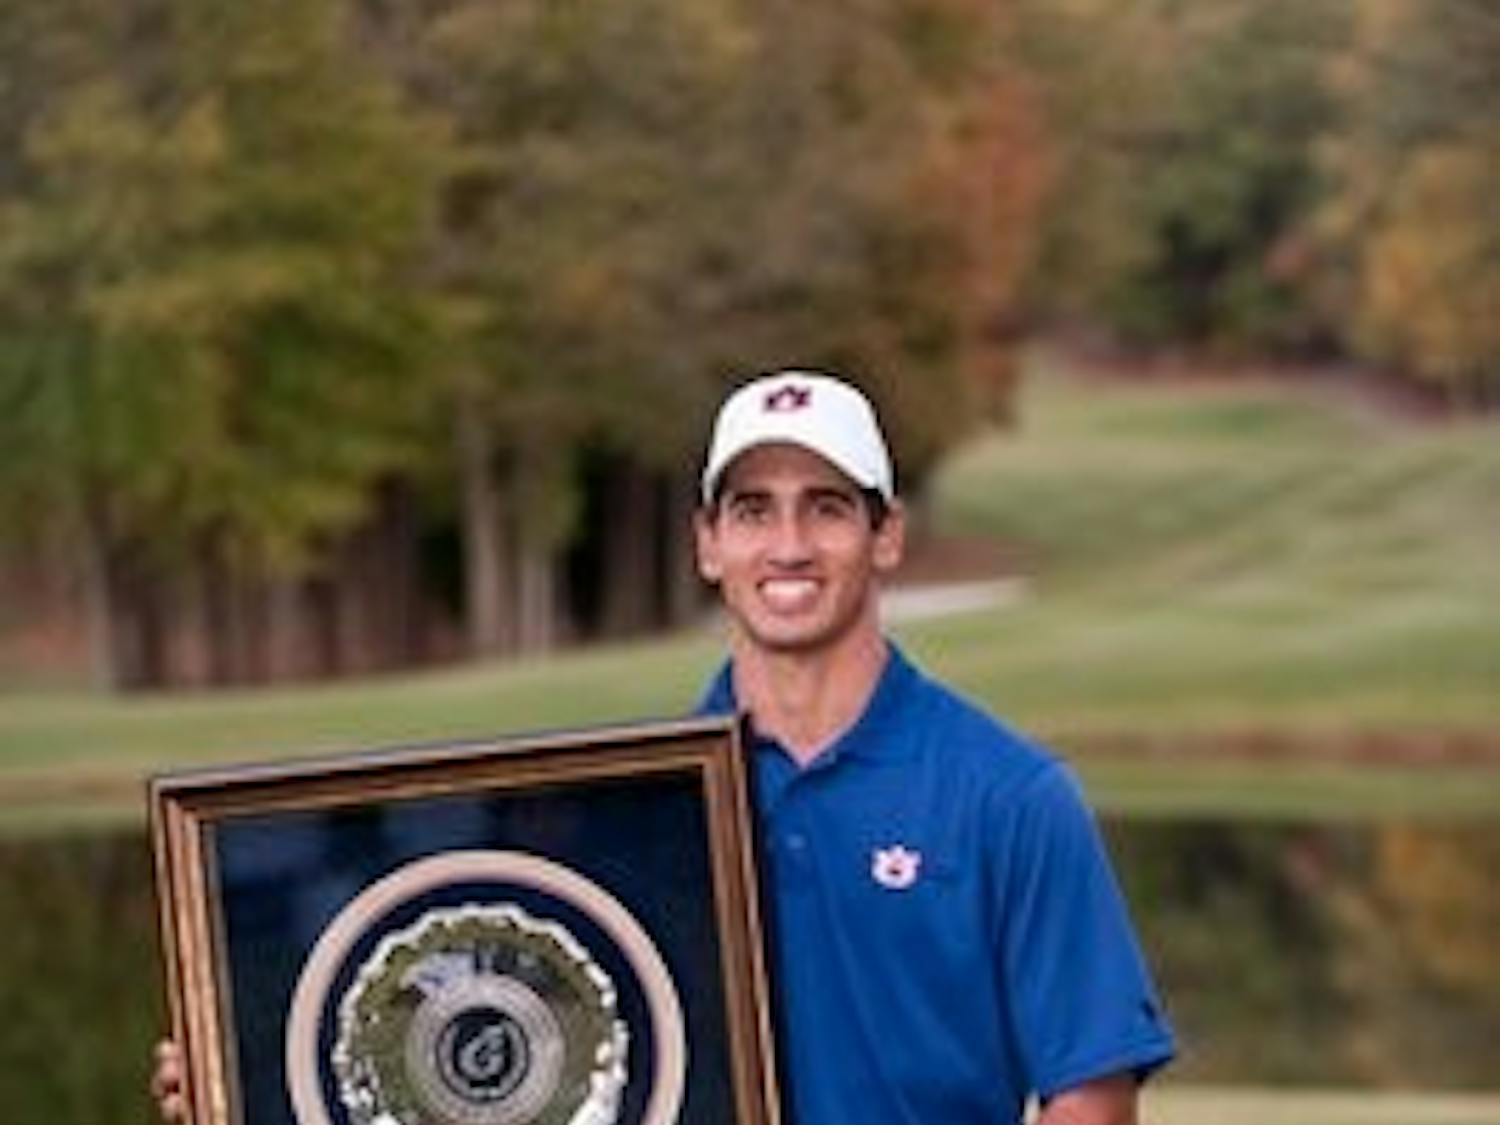 Junior Dominic Bozzelli poses with his trophy. (CONTRIBUTED)